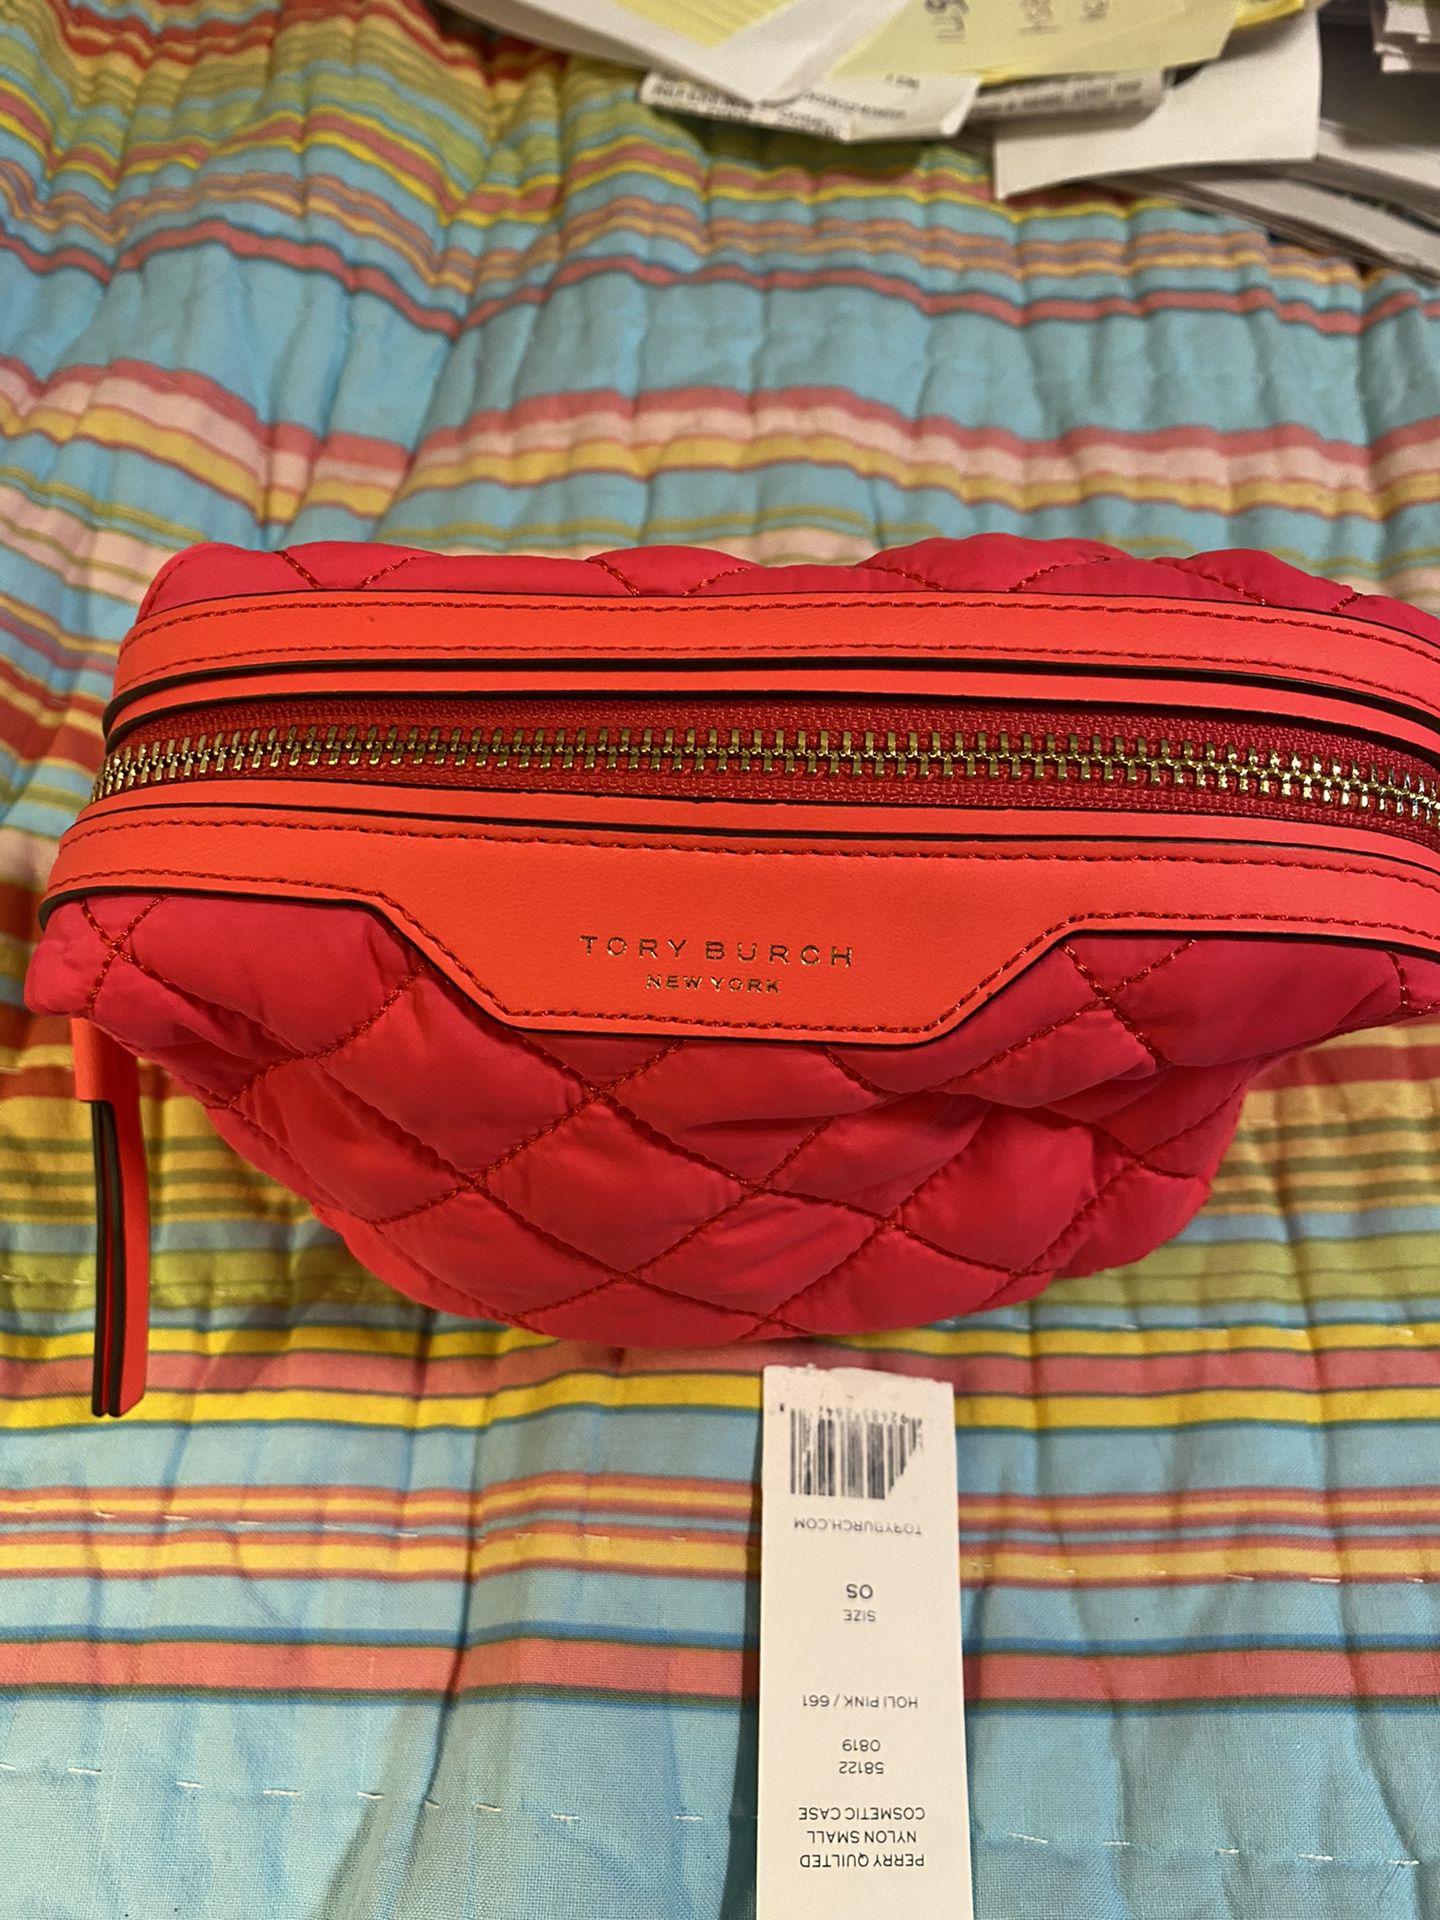 Tory Burch Perry Small Cosmetic Bag for Sale in Clearwater, FL - OfferUp